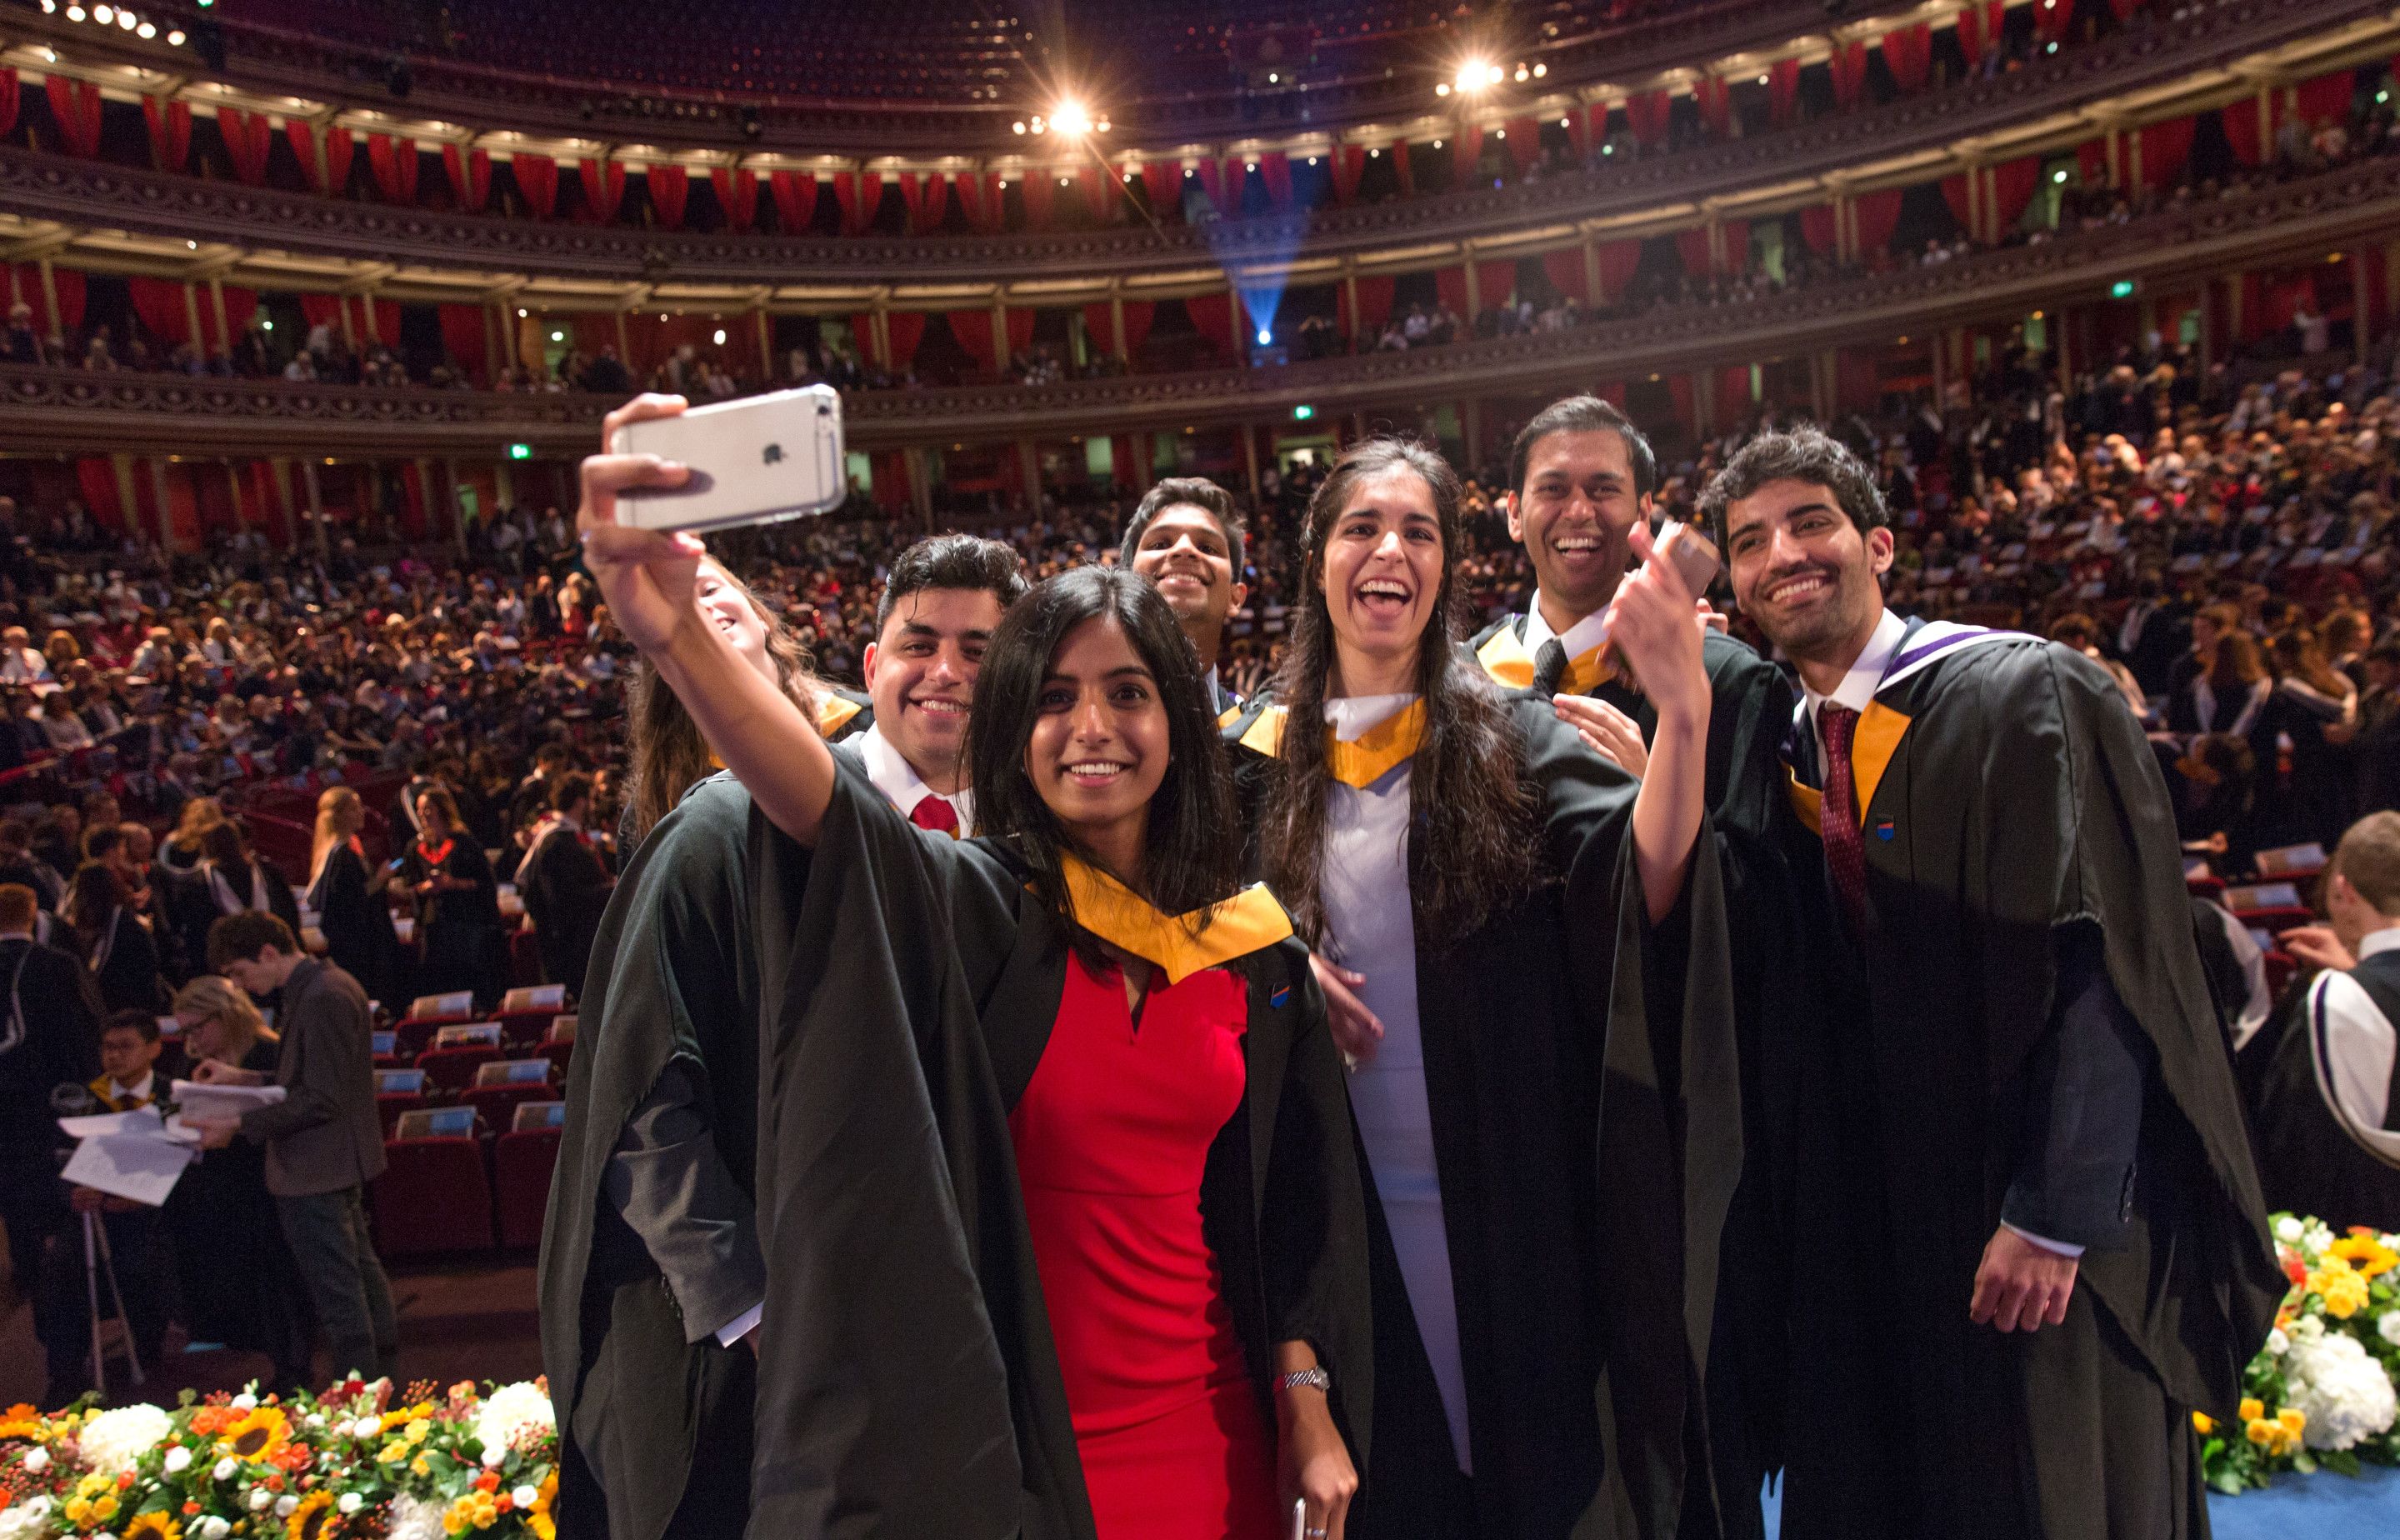 What do Imperial graduates do? Administration and support services